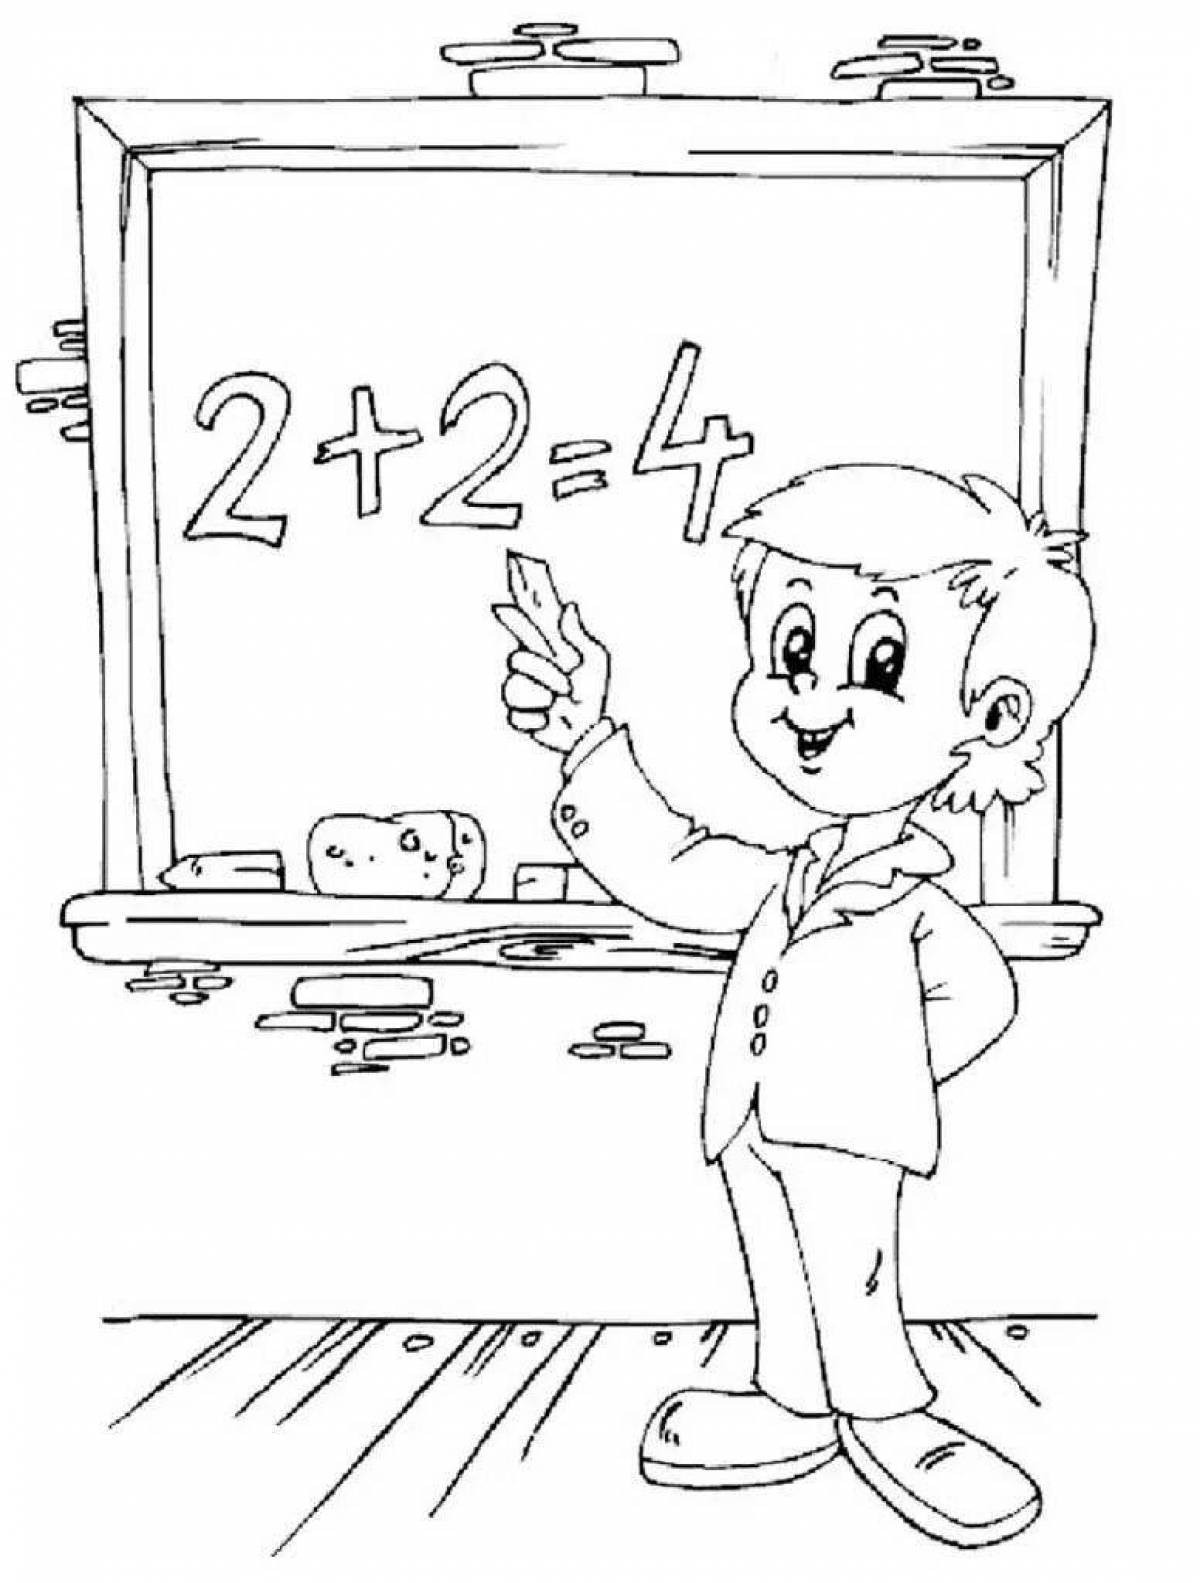 Coloring page of school life